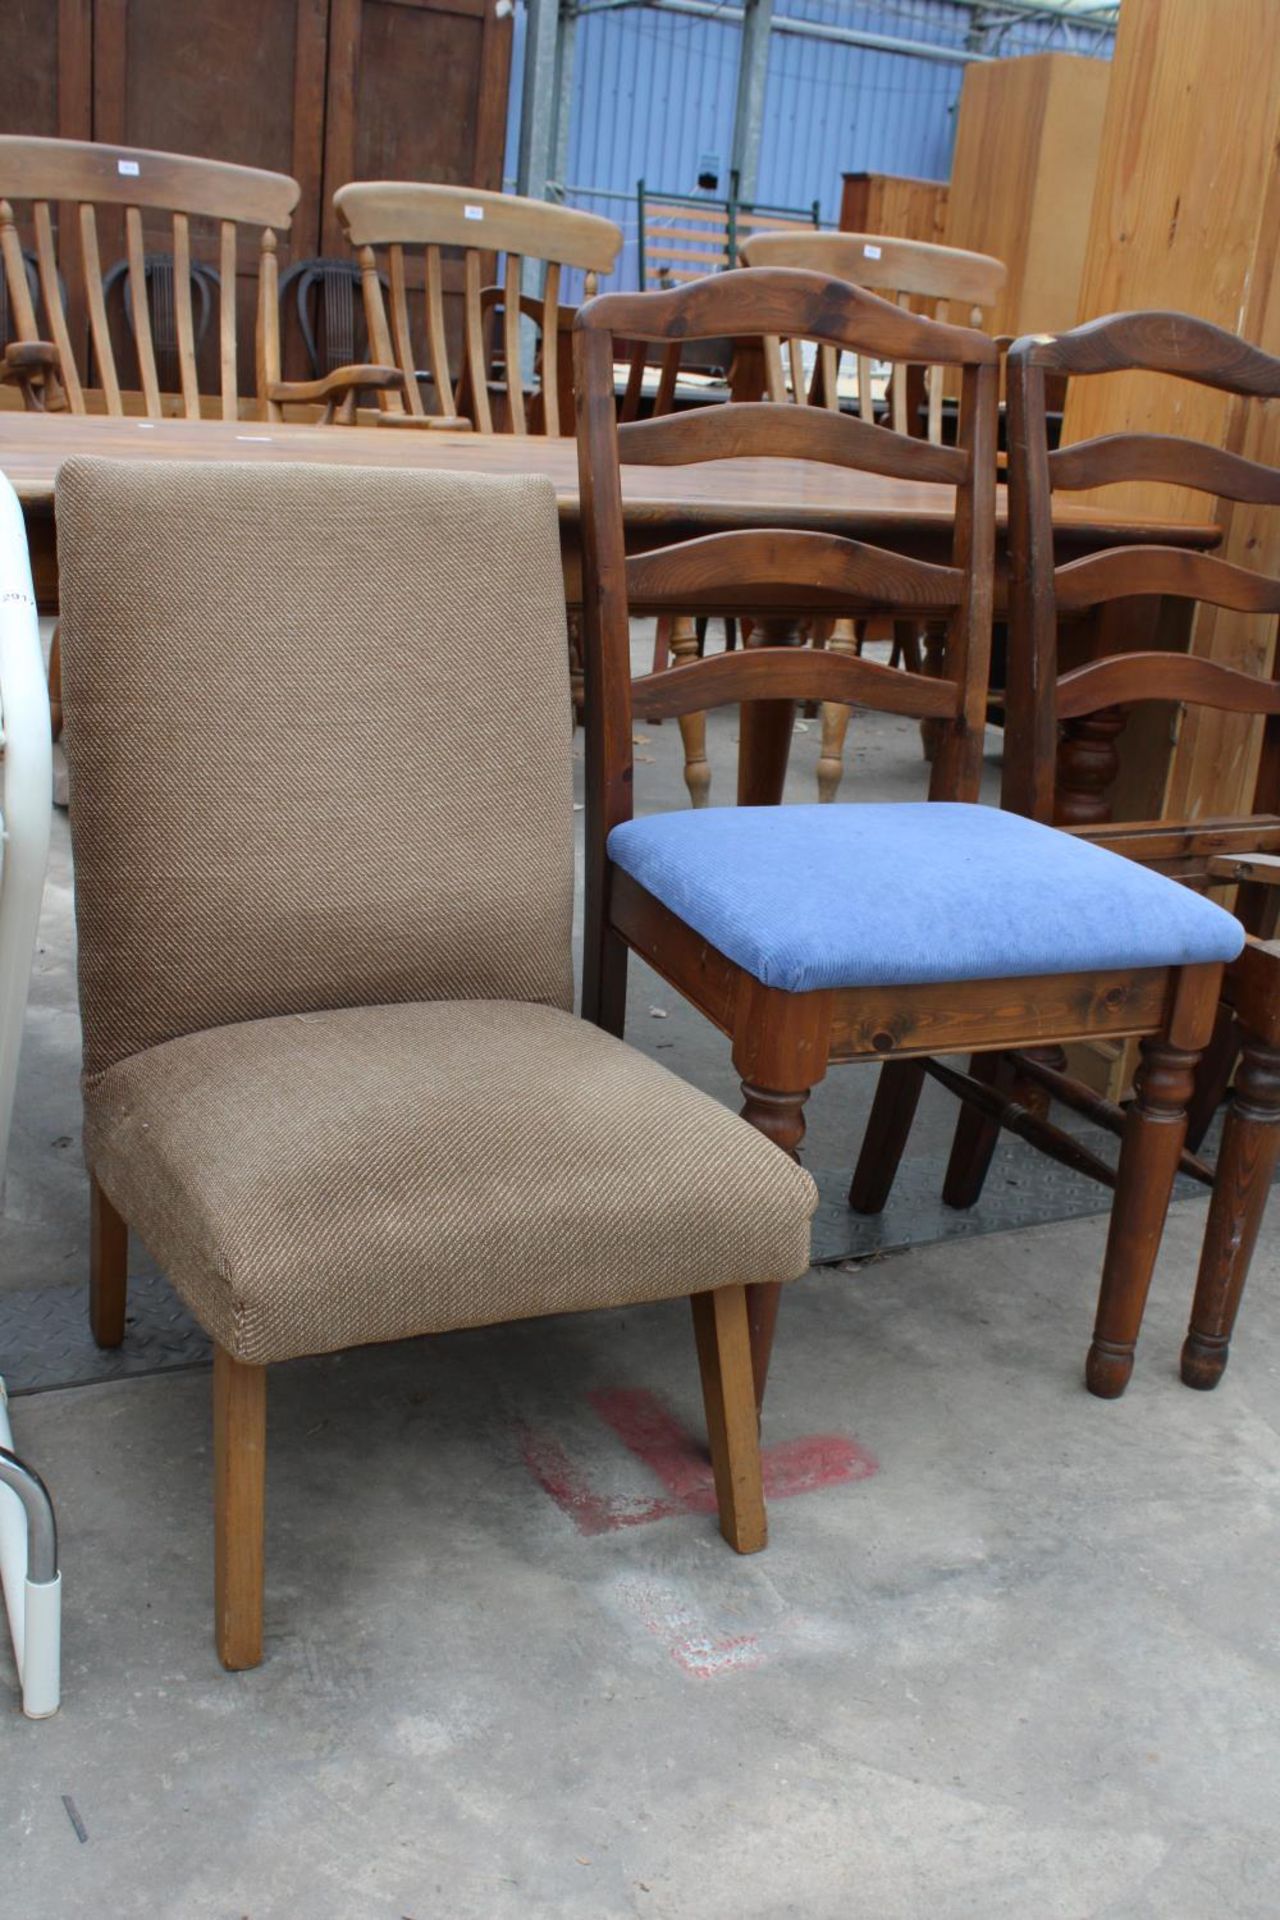 FIVE MODERN LADDER-BACK DINING CHAIRS, ONE BEING A CARVER AND BEDROOM CHAIR - Image 3 of 3